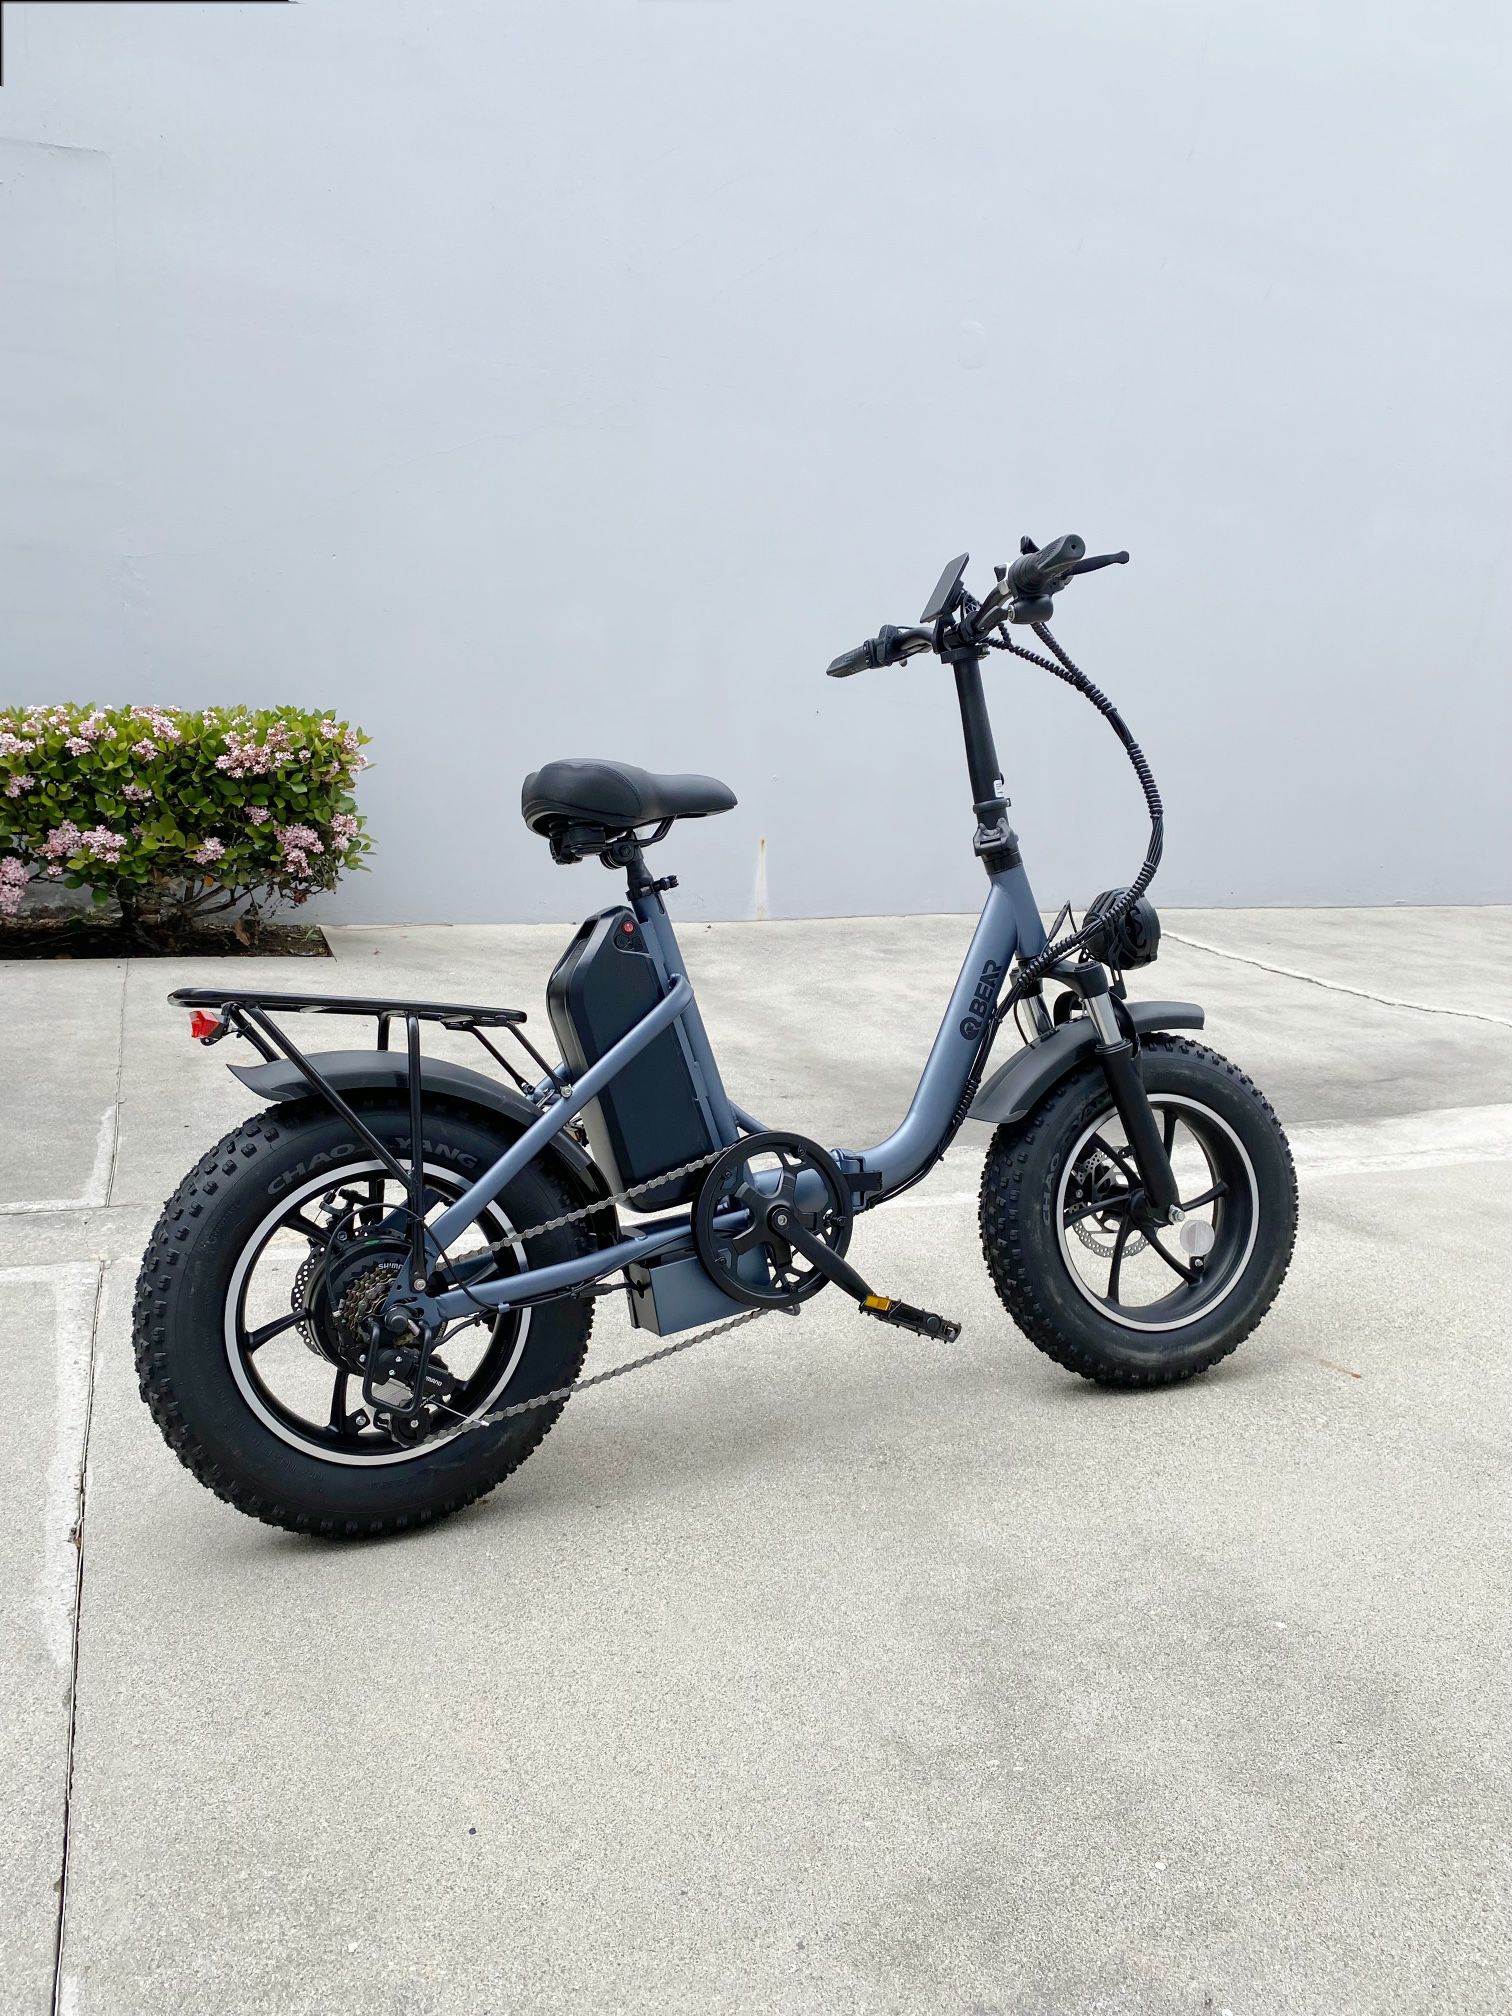 New, eBike step through, foldable 500w 48v 15ah, top speed 29mph range up to 55 miles electric bike, colors options:white/gray/orange/blue